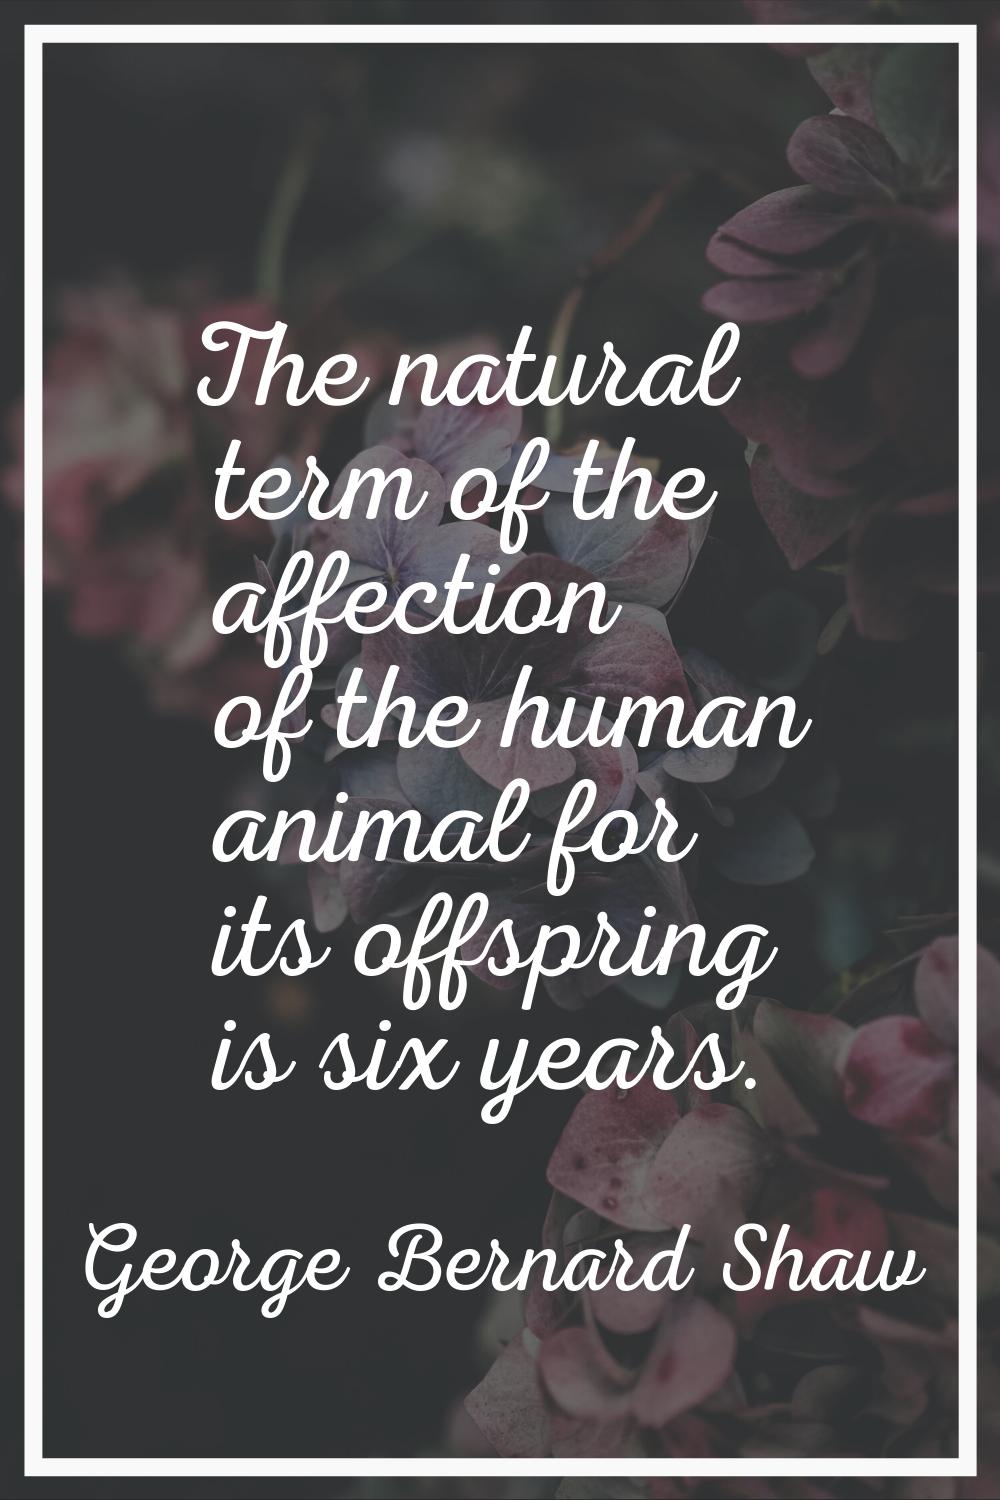 The natural term of the affection of the human animal for its offspring is six years.